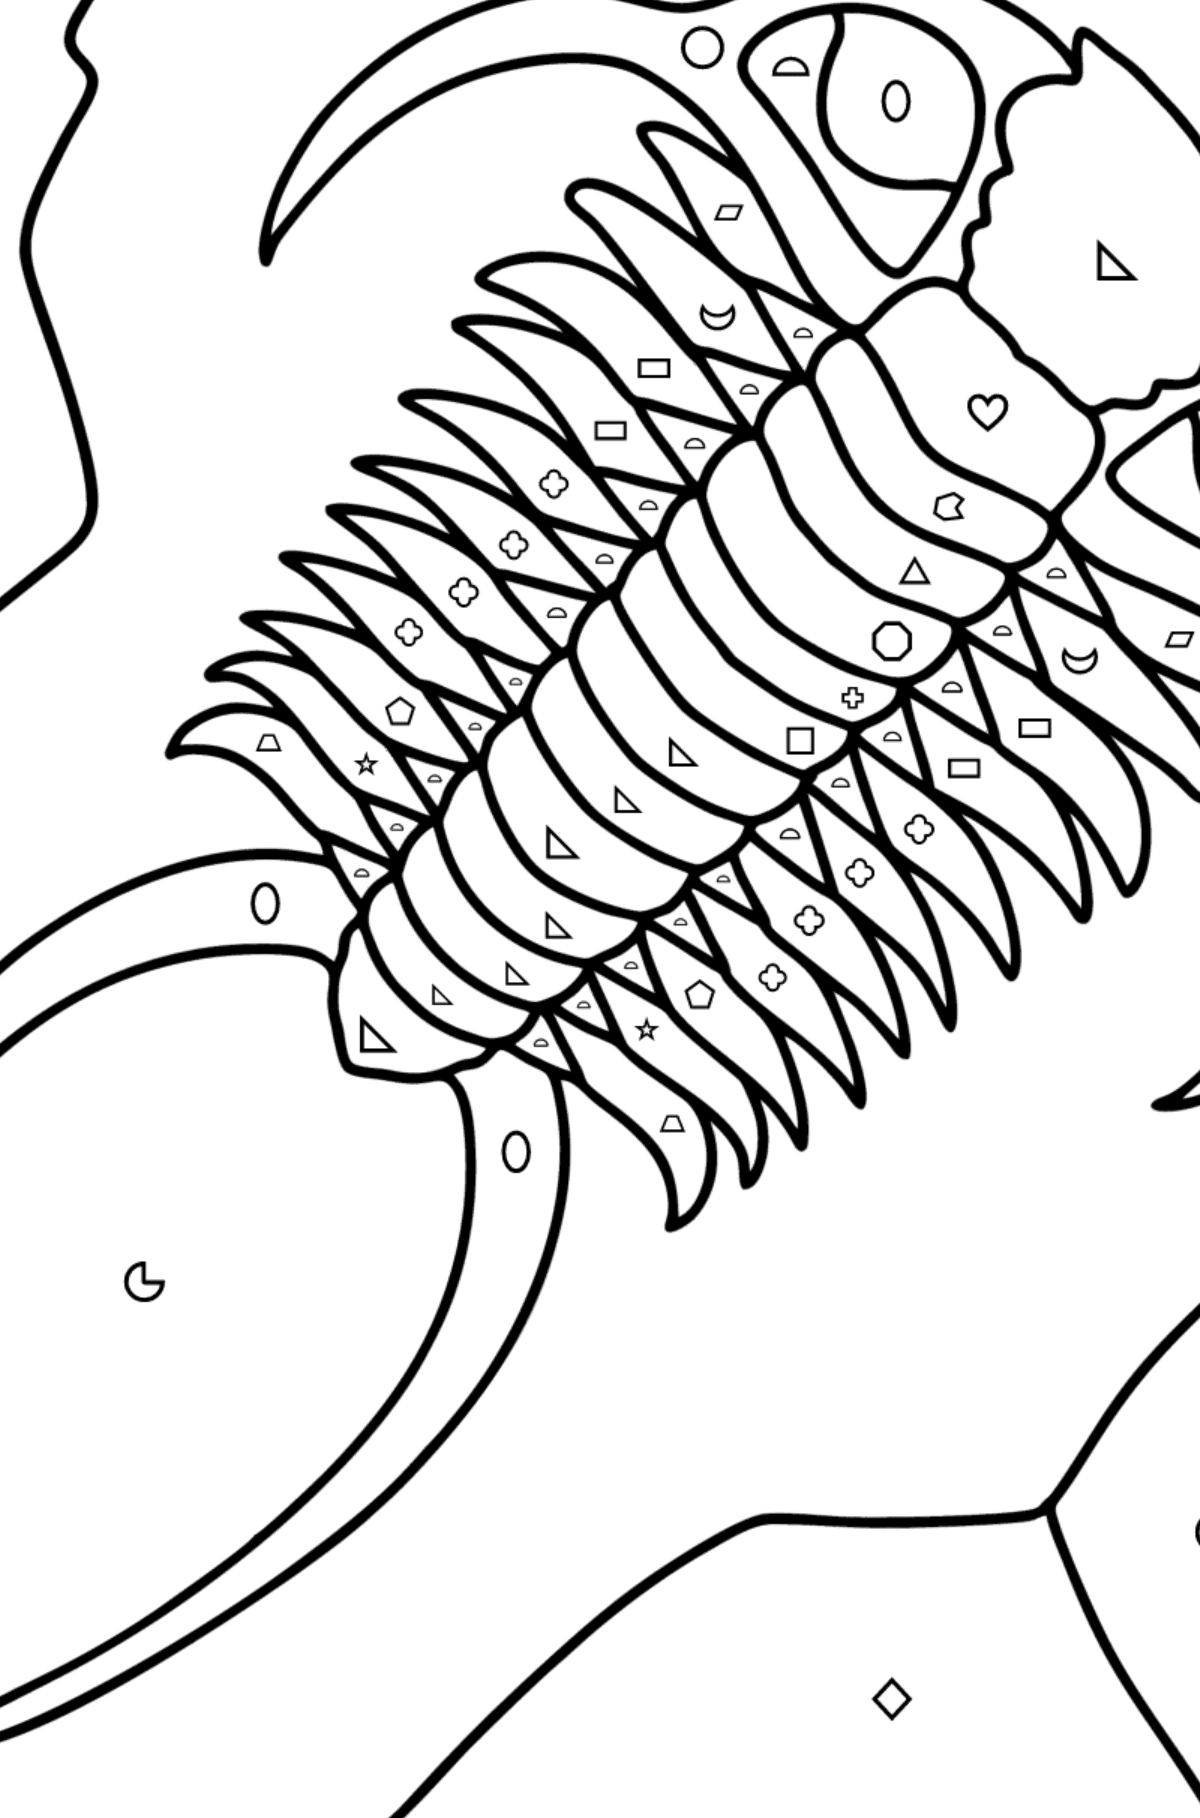 Sea Fossil coloring page - Coloring by Geometric Shapes for Kids